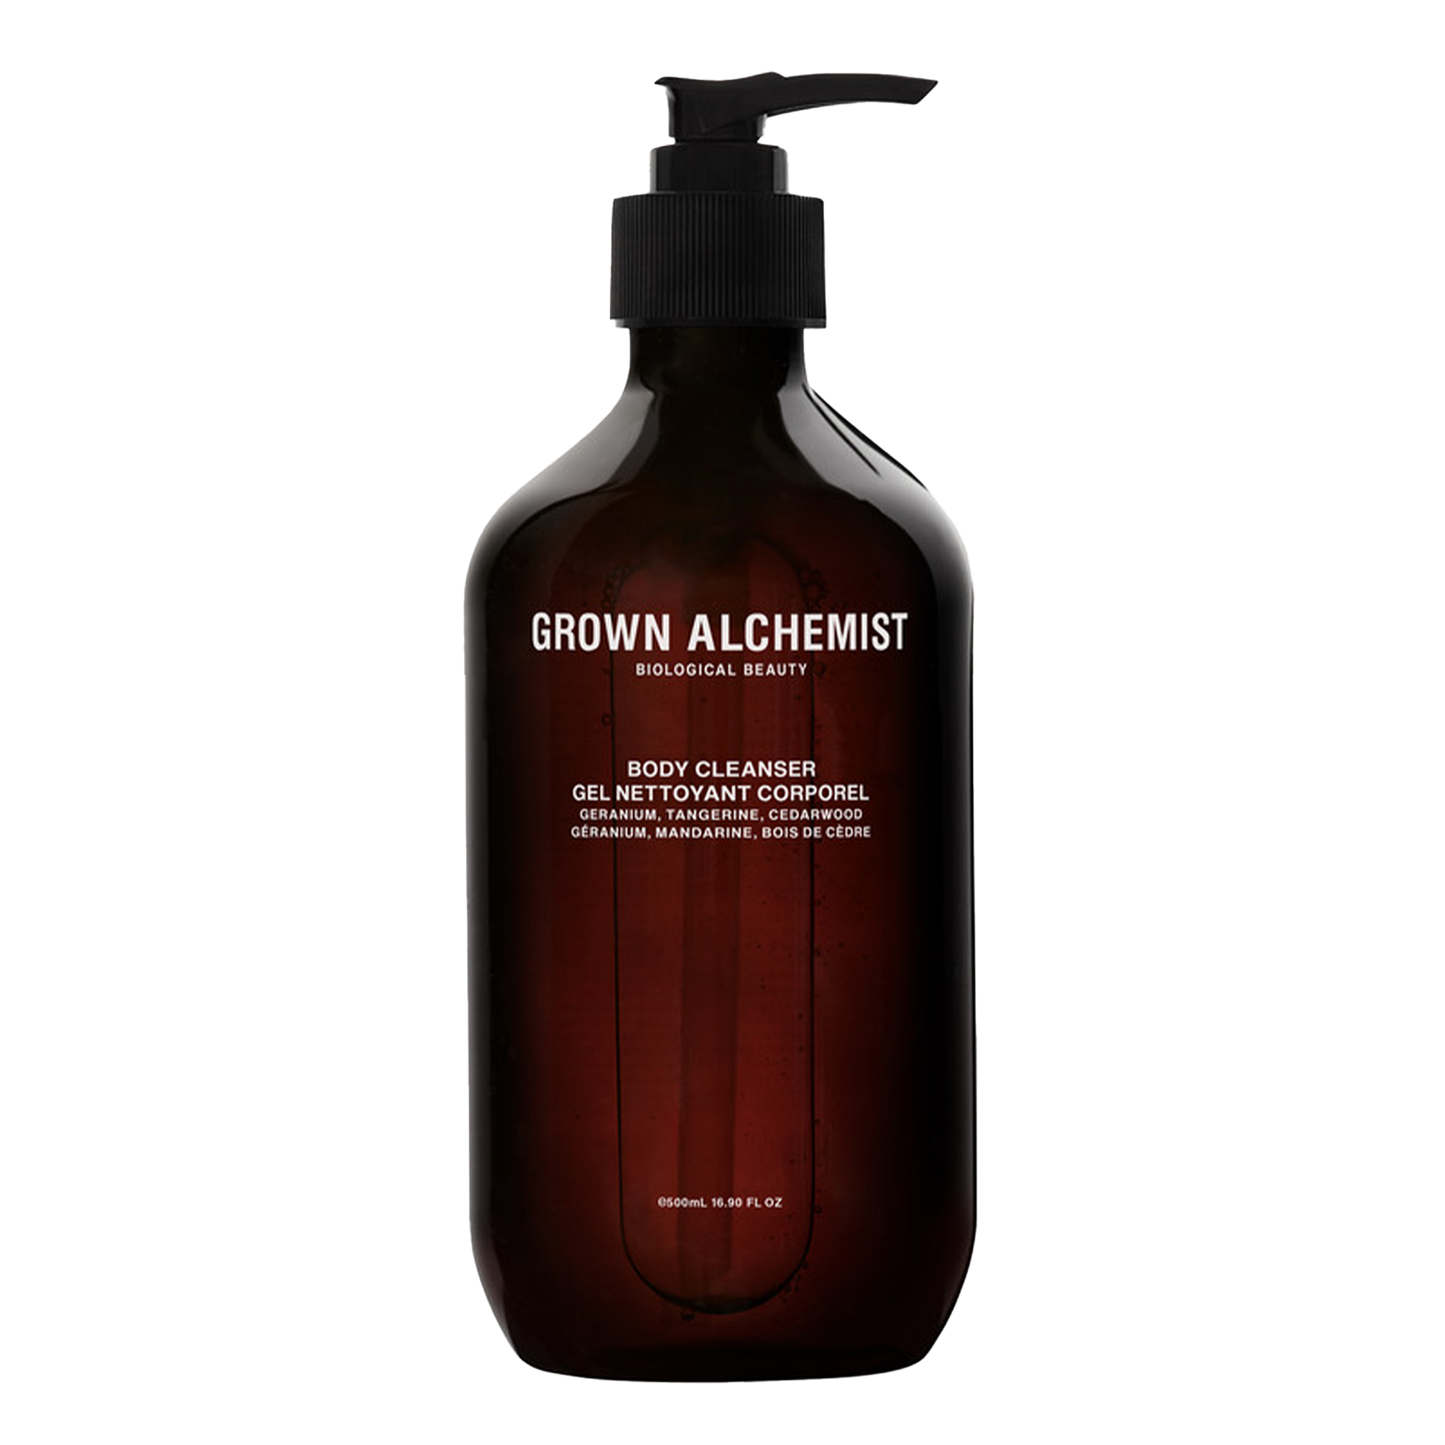 Grown Alchemist Body Cleanser: A sensuous aromatic, gentle body gel for all skin types. Leaves skin thoroughly clean, refreshed and toned without causing dryness.